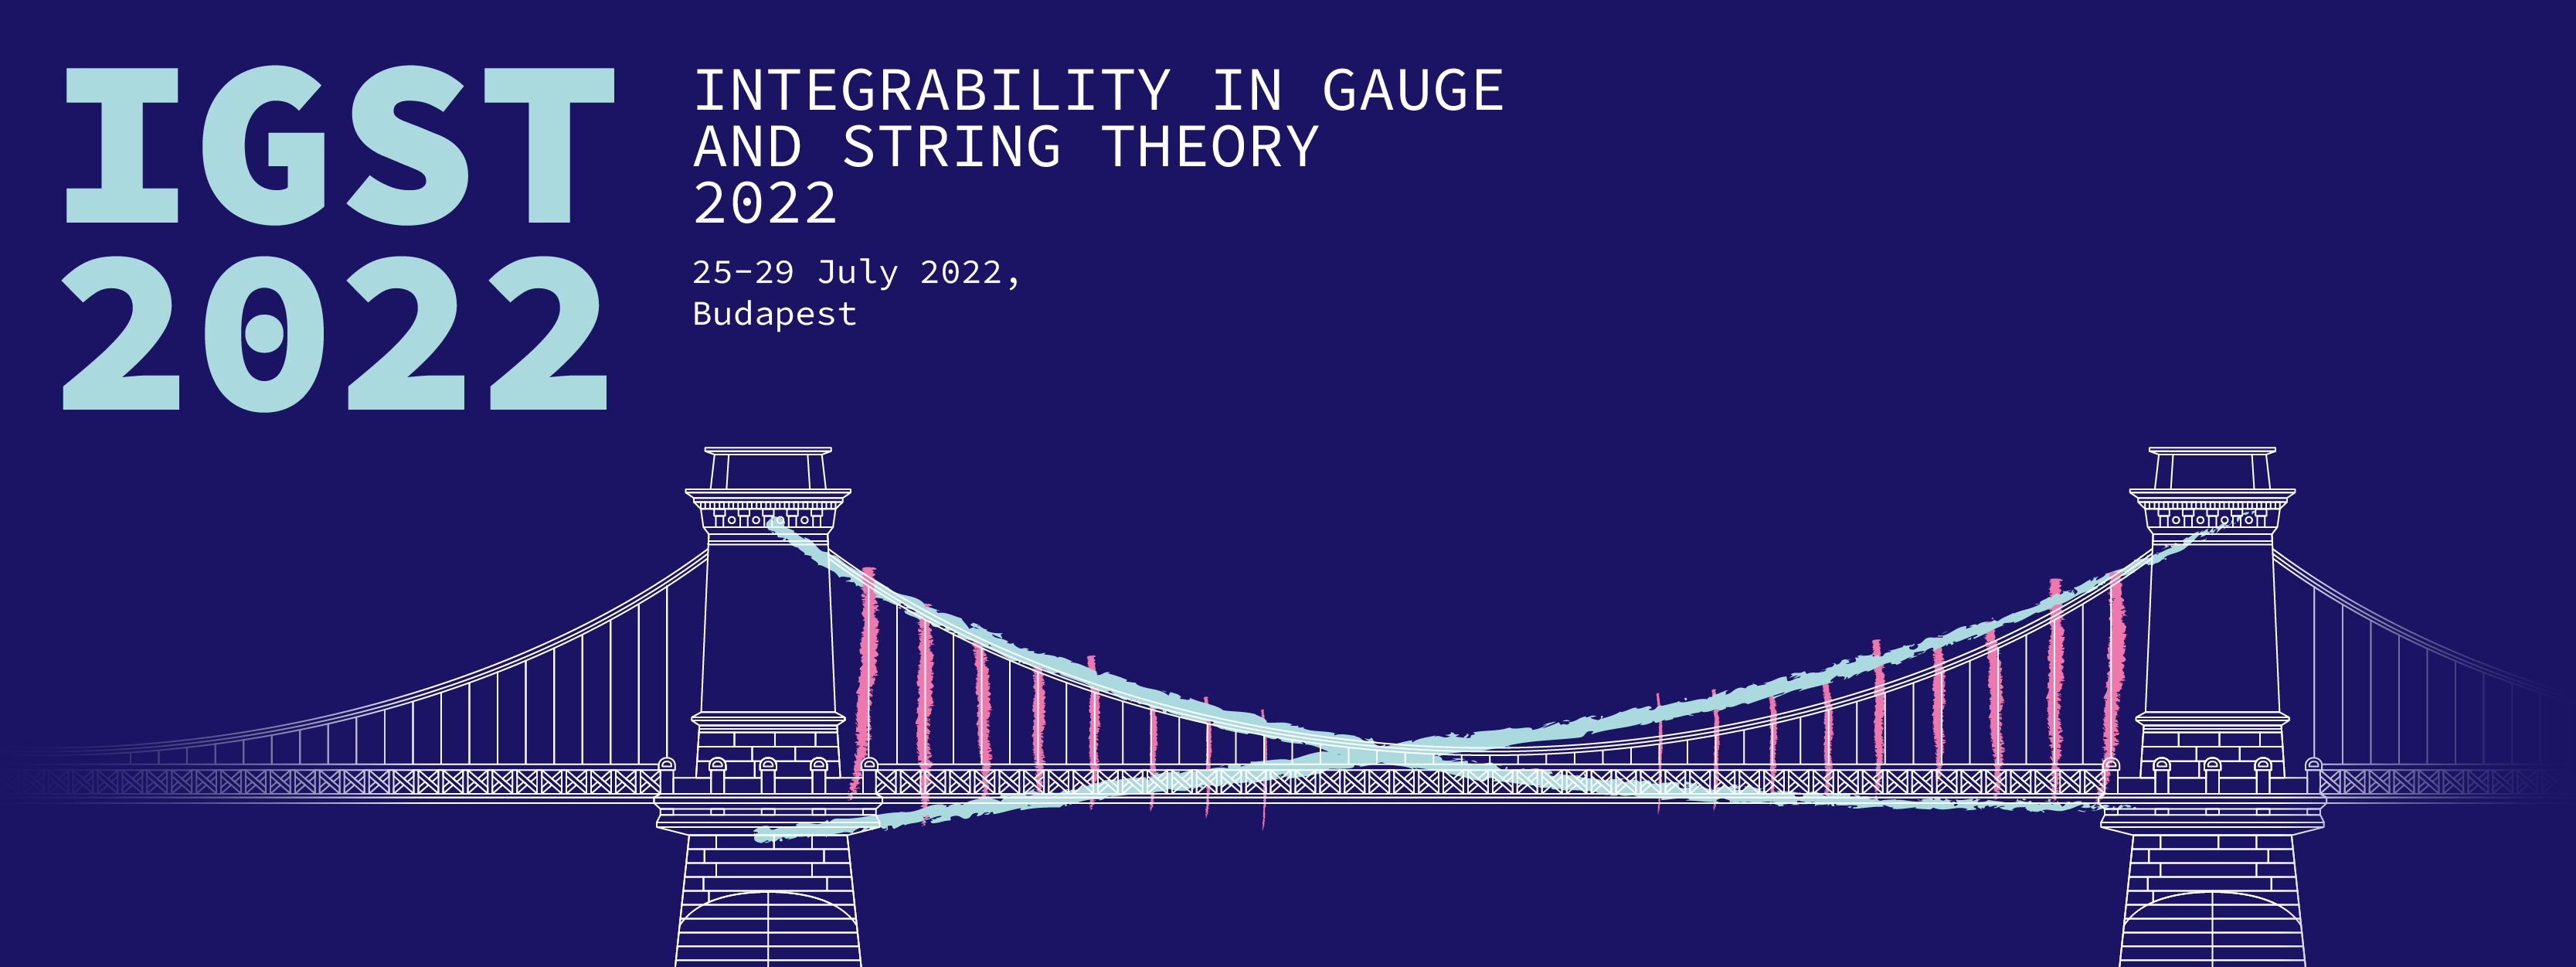 Integrability in Gauge and String Theory 2022